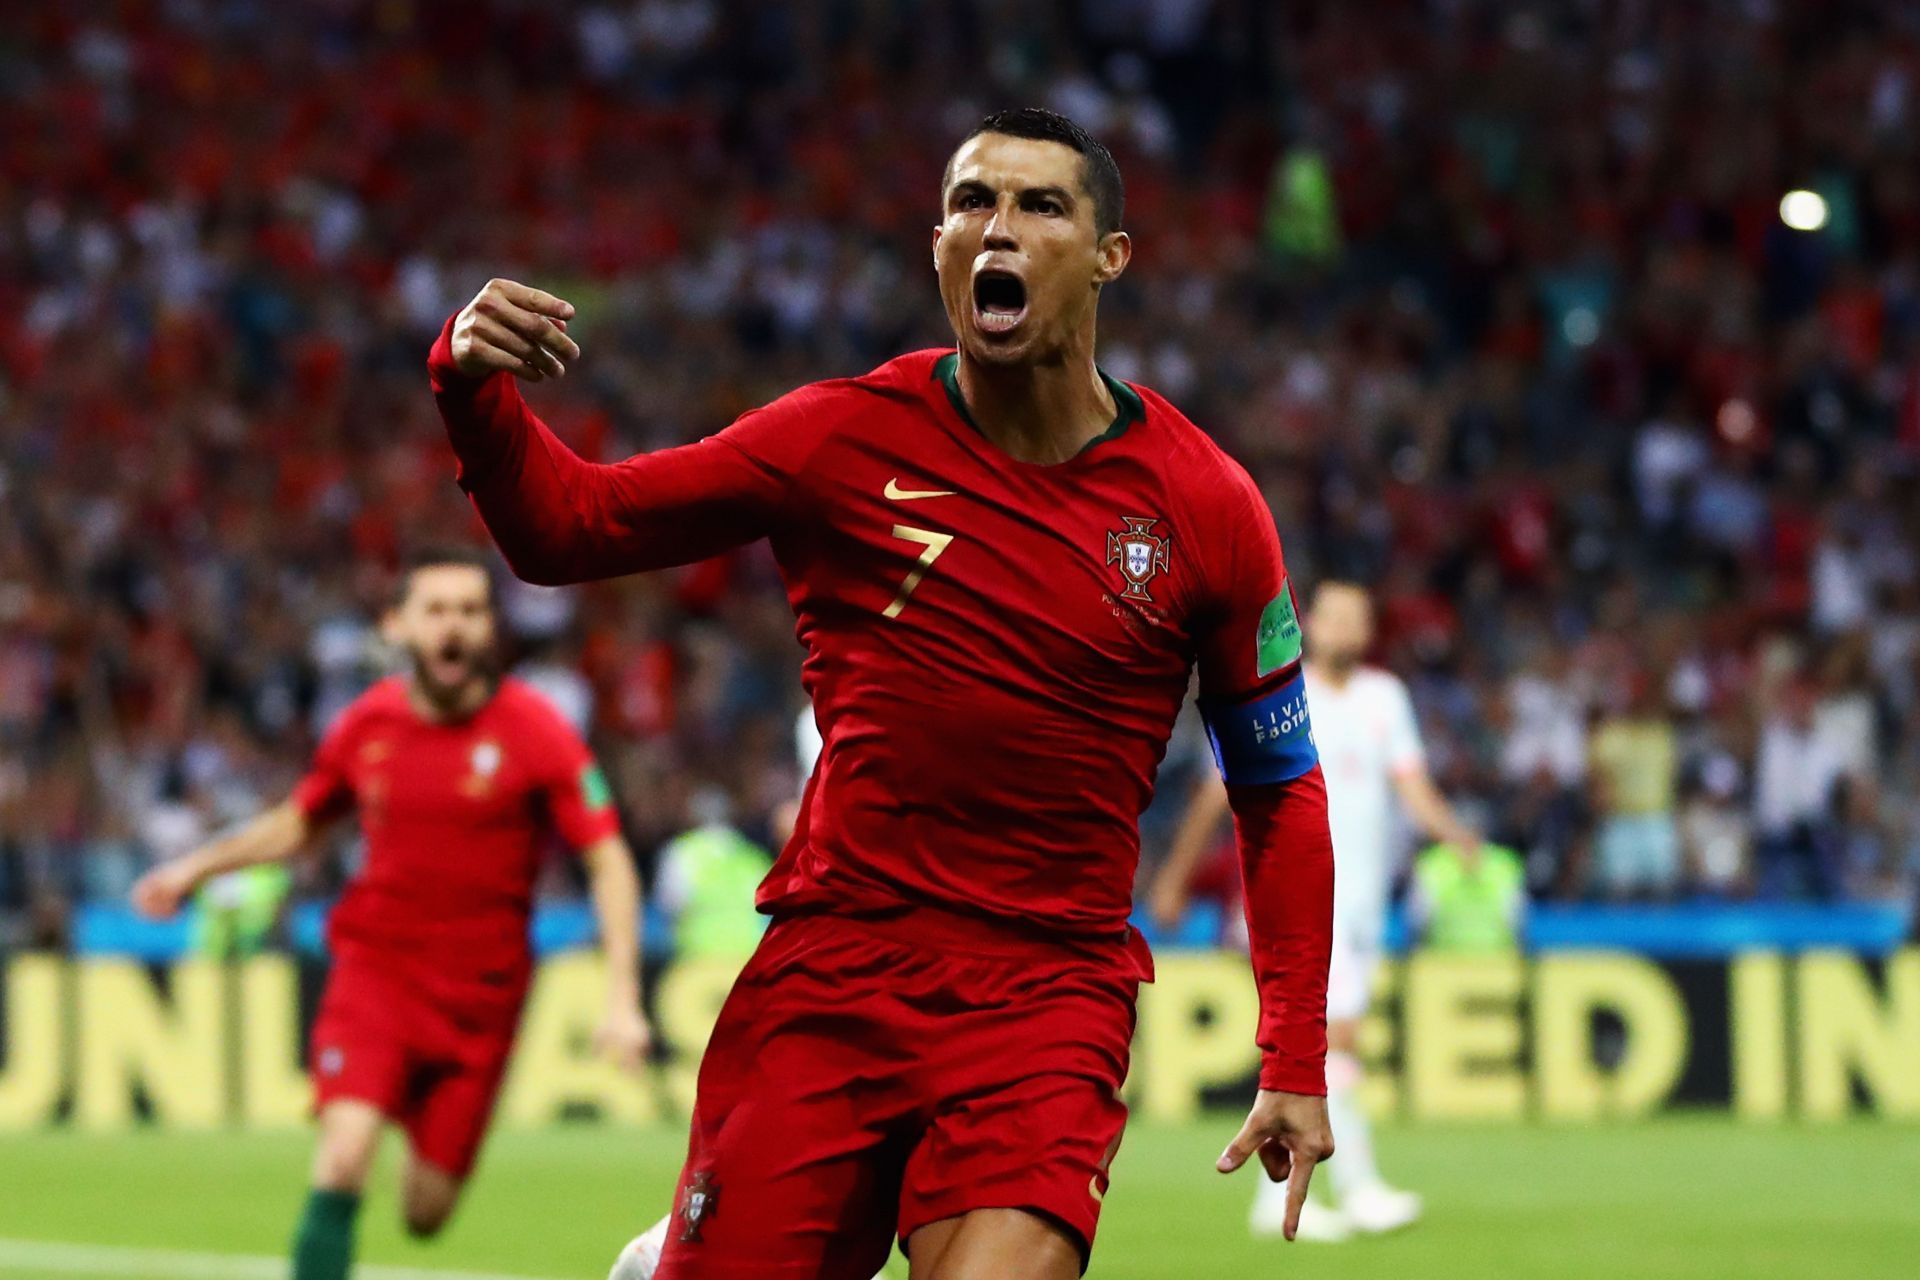 Cristiano Ronaldo will look to fire Manchester United and Portugal to success.